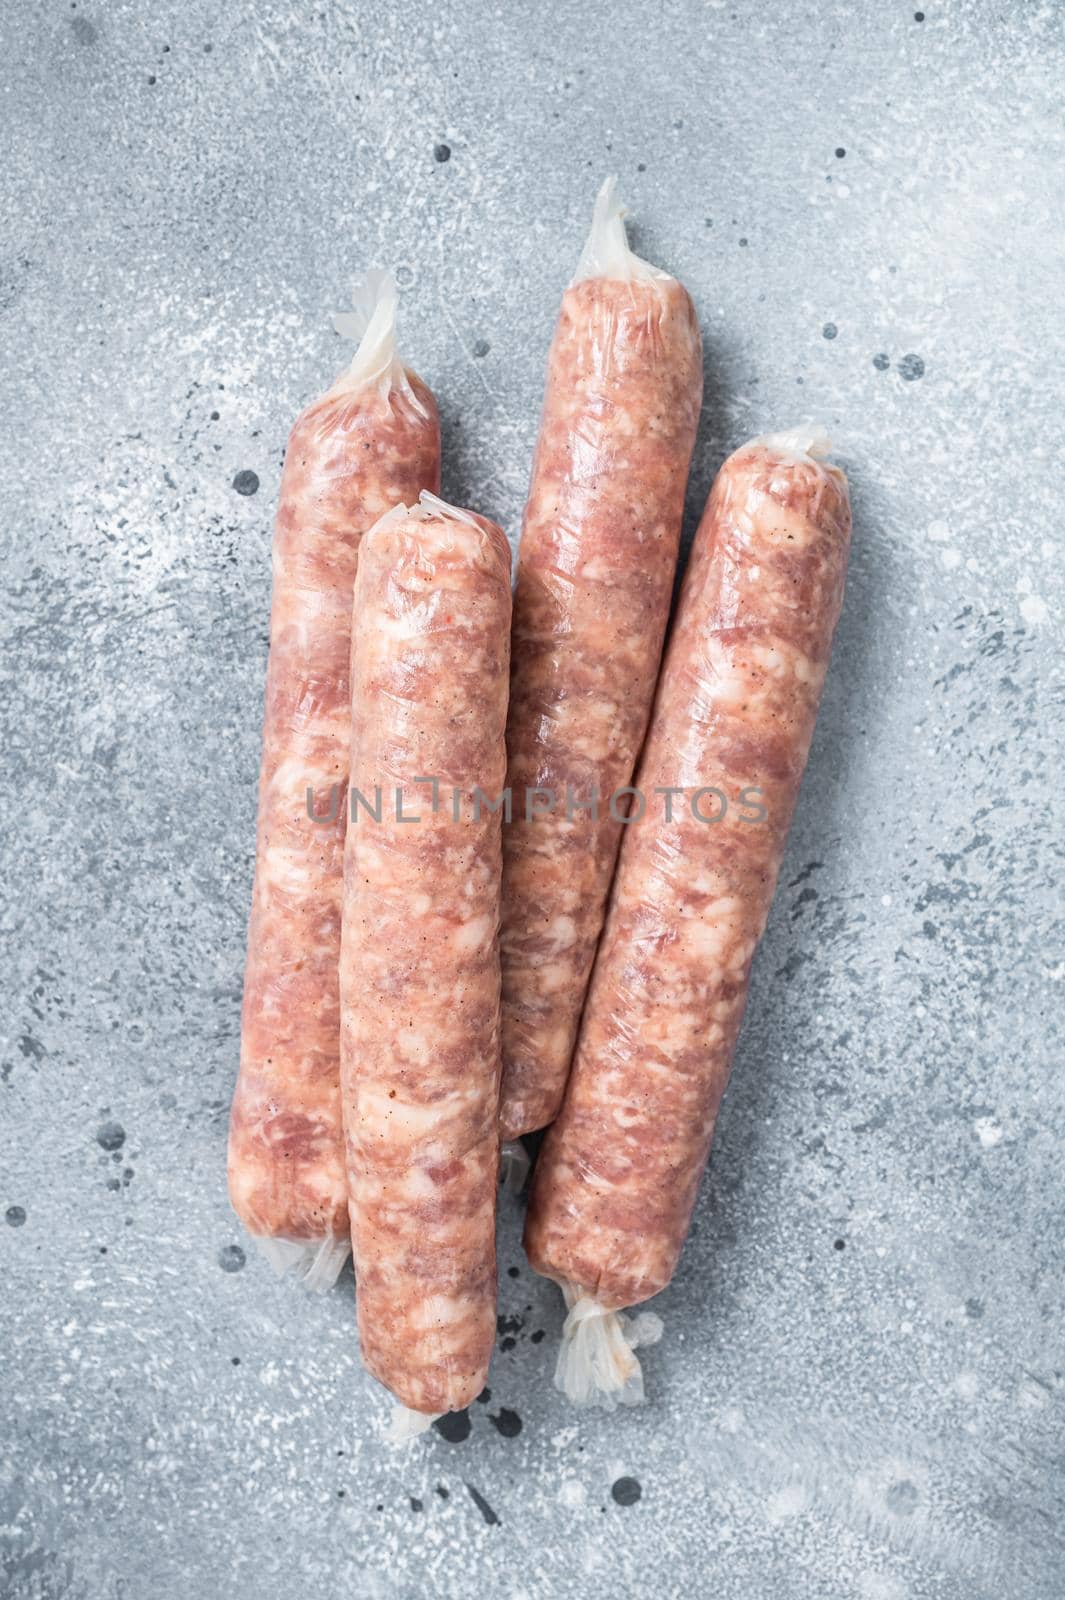 Bratwurst raw sausages on a kitchen table. Gray background. Top view.